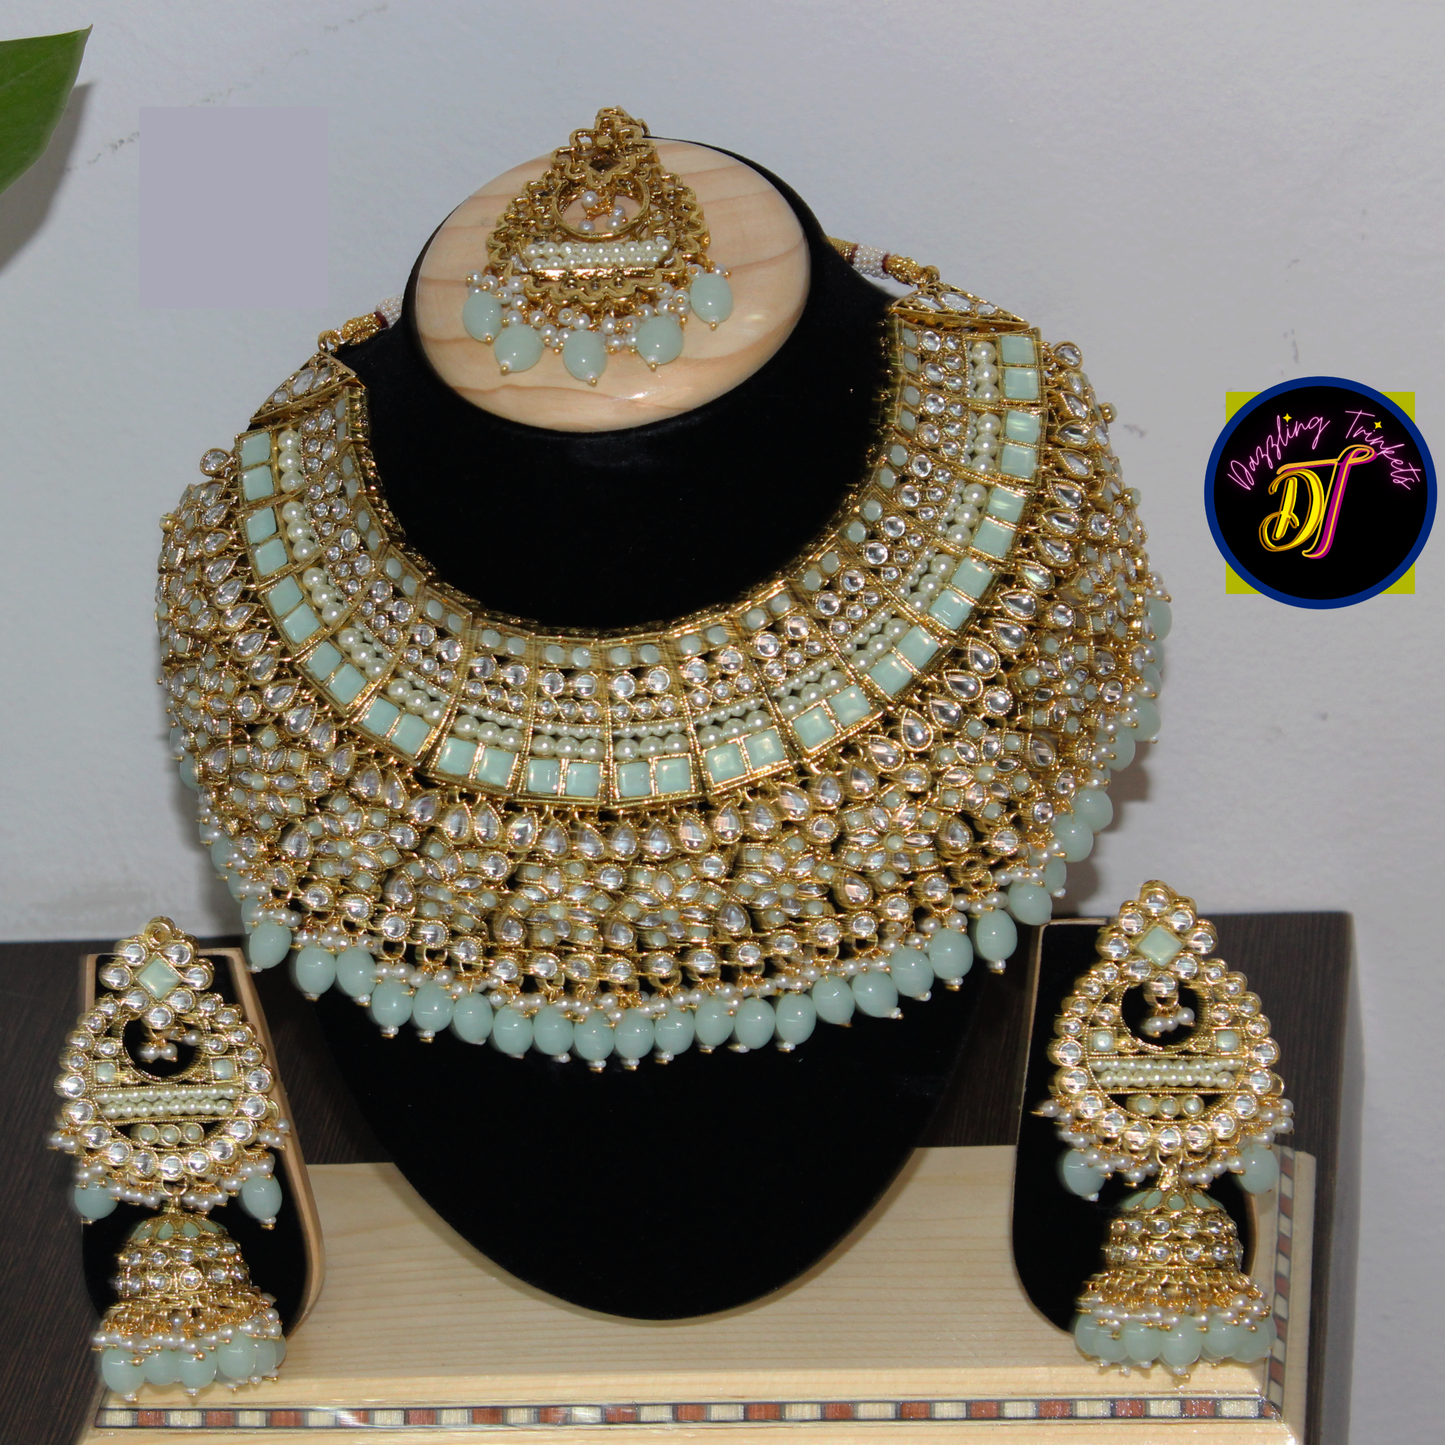 The image showcases the luxurious design and intricate detailing of the Kundan Chokar Necklace Set, available on www.dazzlingtrinkets.com. It exudes a sense of opulence and sophistication, perfect for special occasions or formal events.